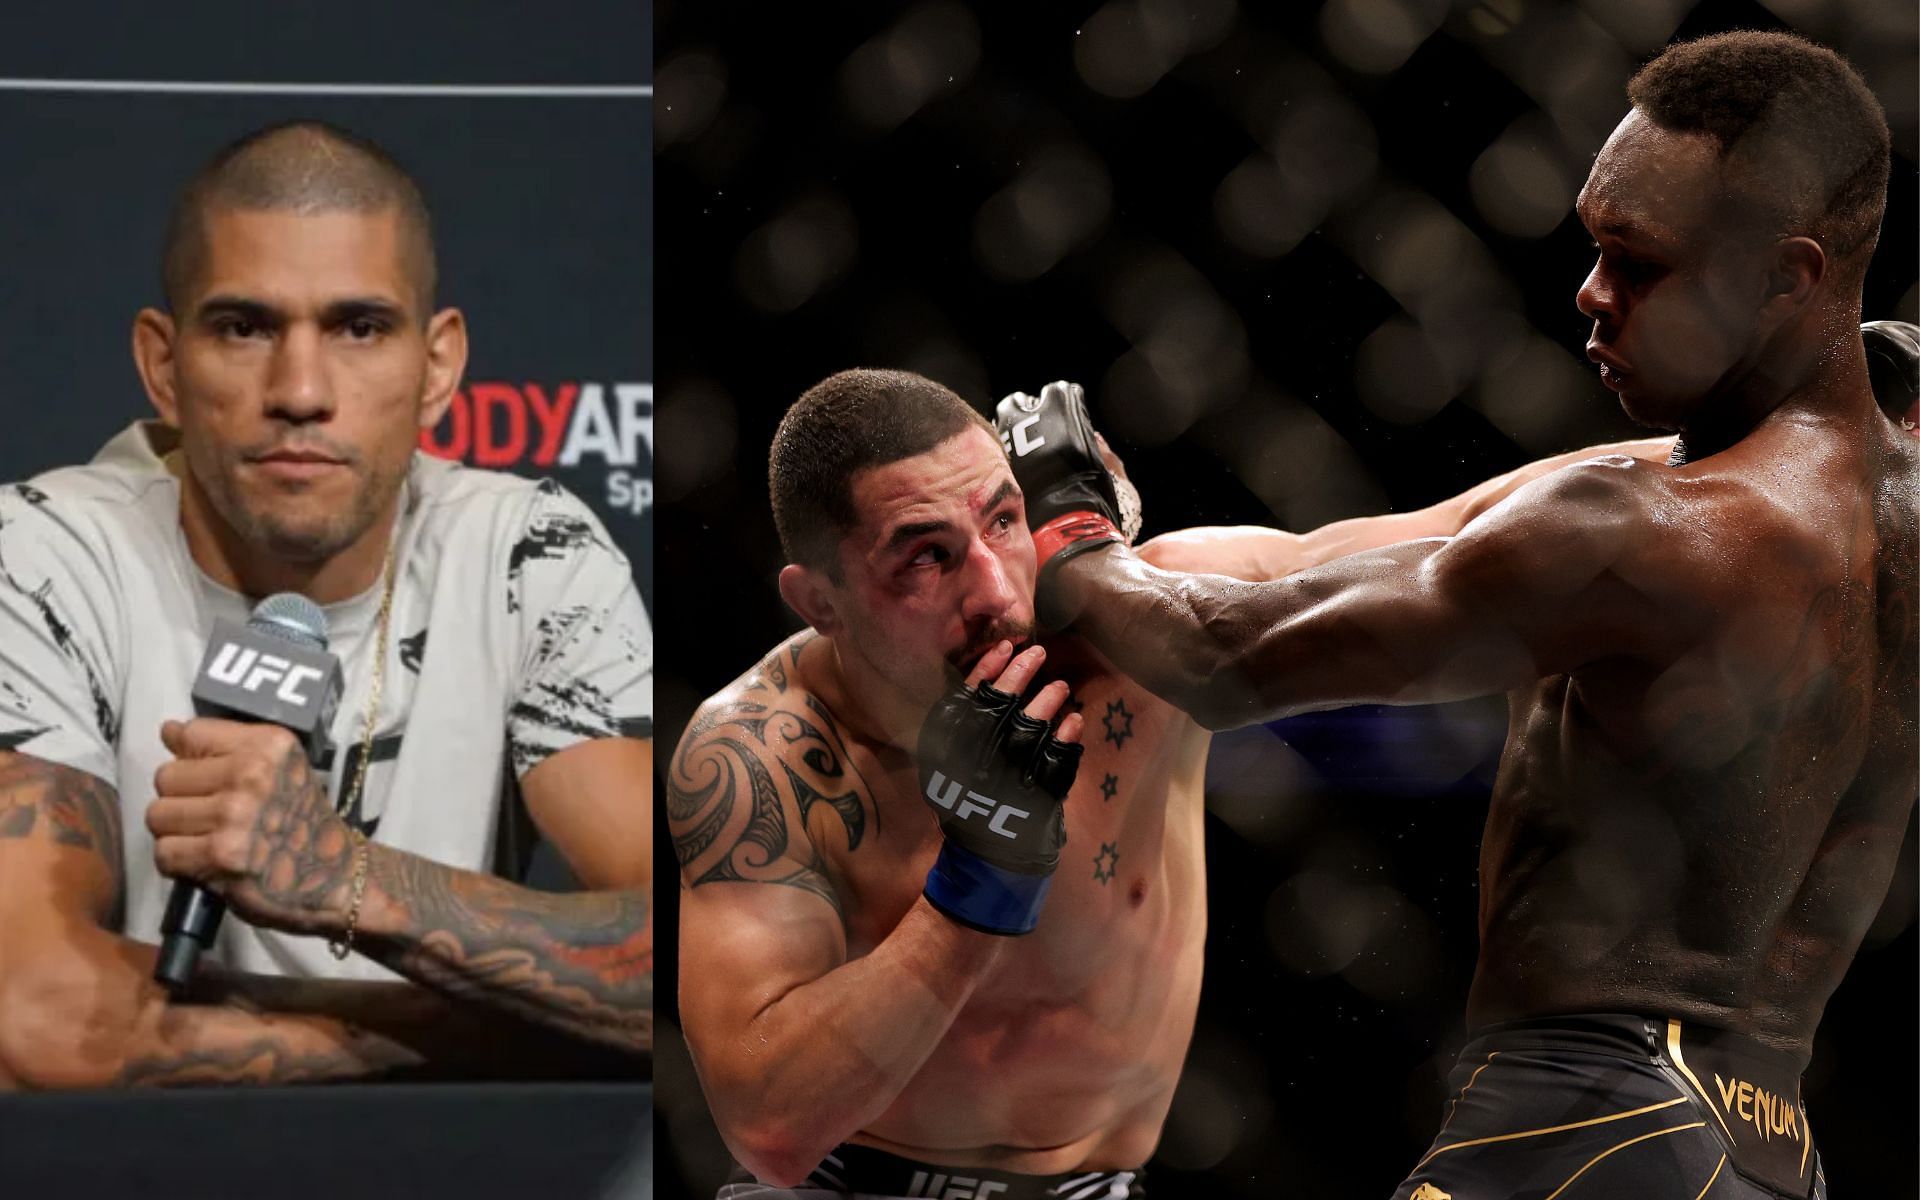 Alex Pereira (left) and Israel Adesanya vs. Robert Whittaker (right). [Images courtesy: left from YouTube FanSided MMA and right from Getty Images]